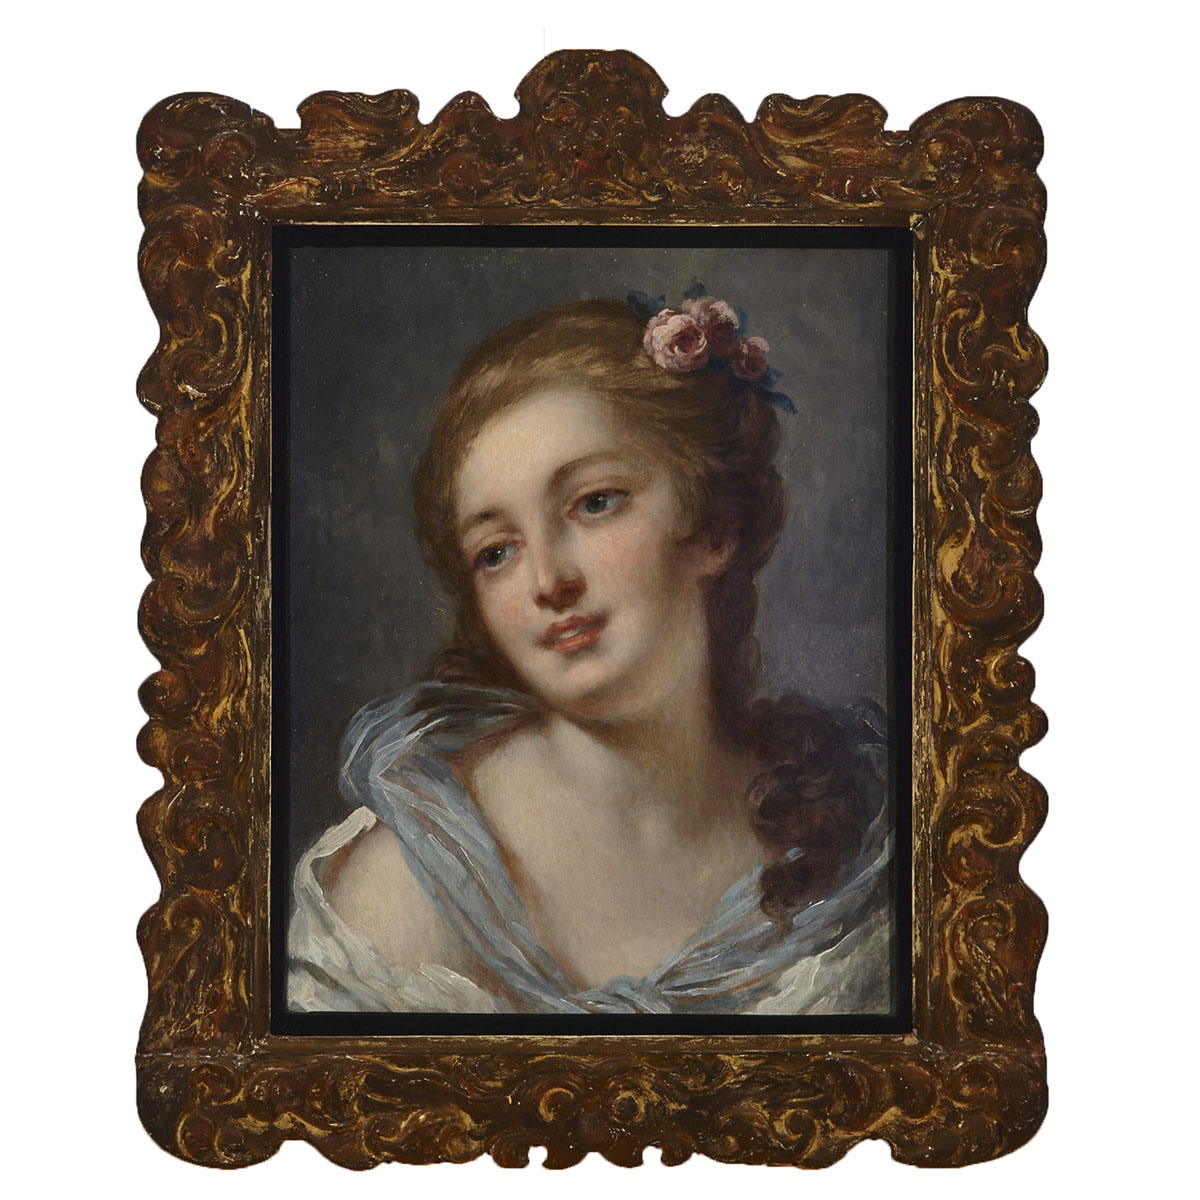 Attributed to Jeanne-Philiberte Ledoux (1767-1840)